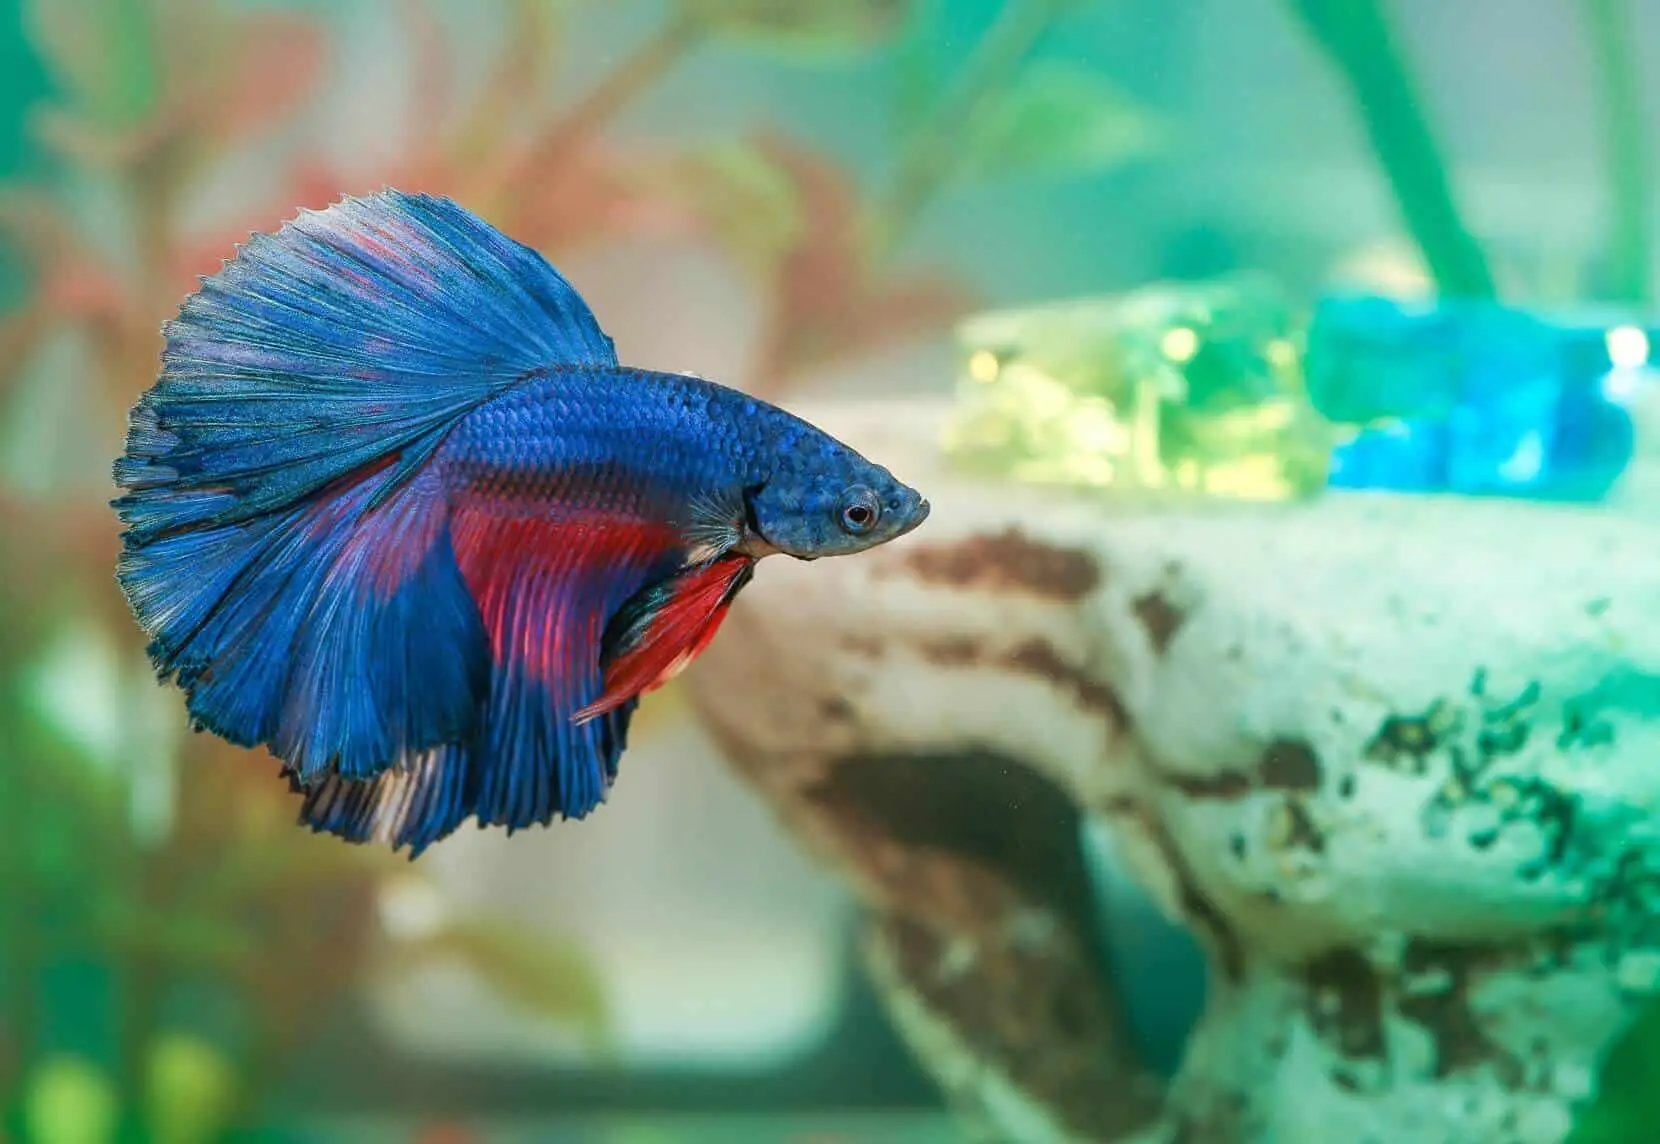 How Long Do Betta Fish Live? (Tips to Increase Life Expectancy) | Fishkeeping World